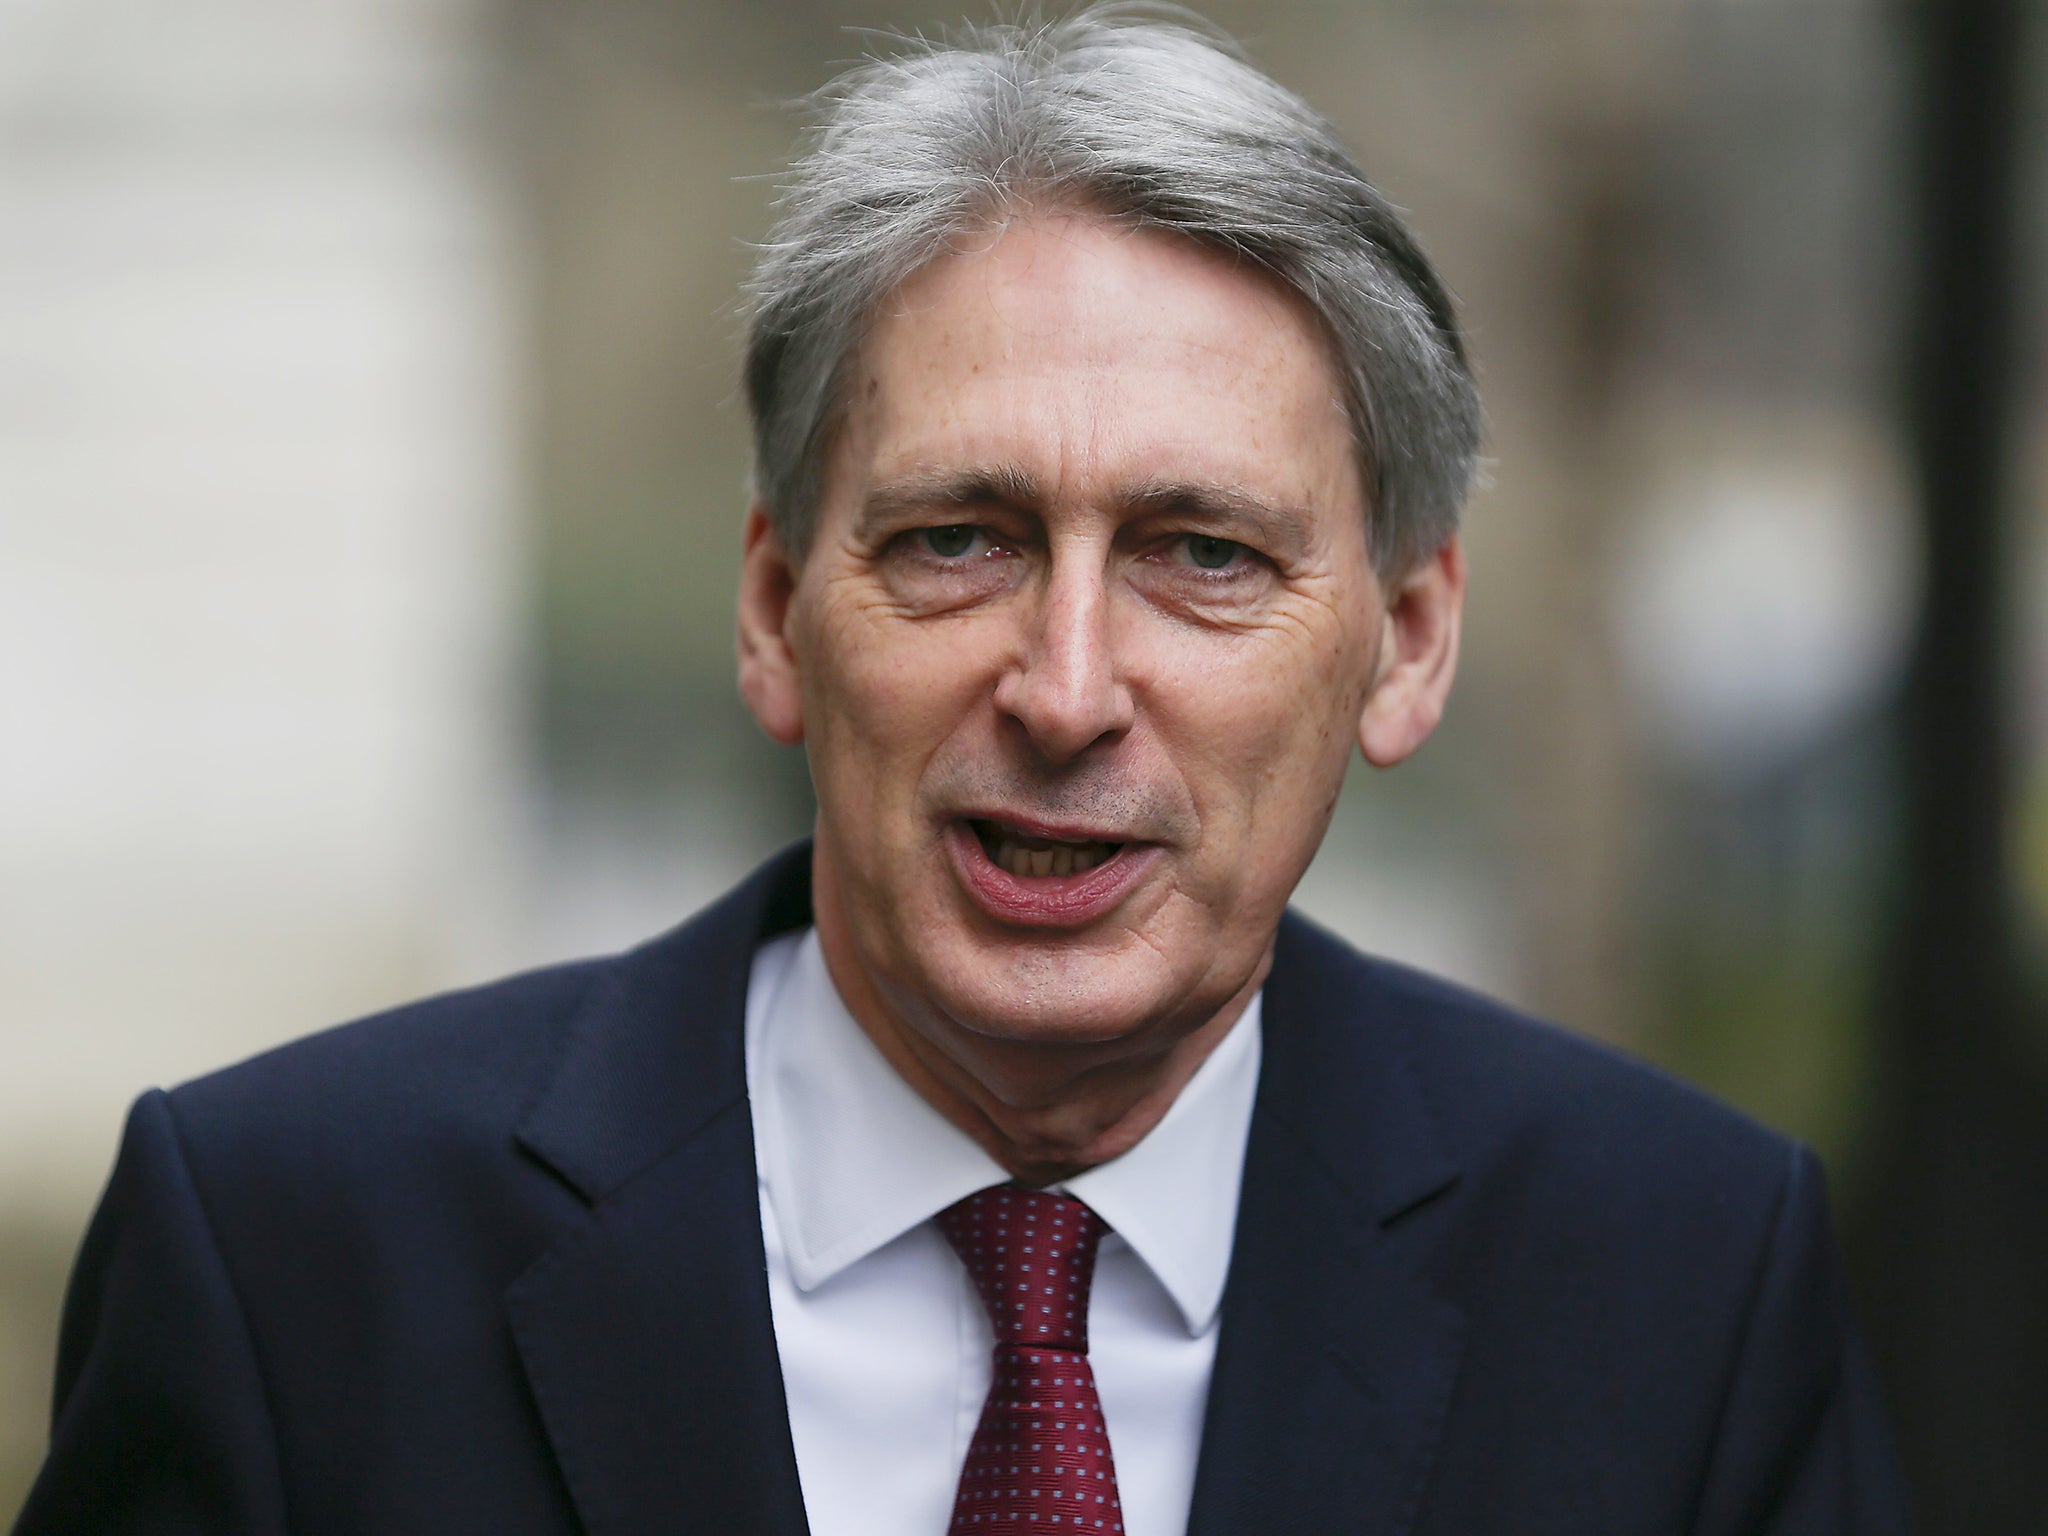 Chancellor Philip Hammond is due to present his first Budget next week